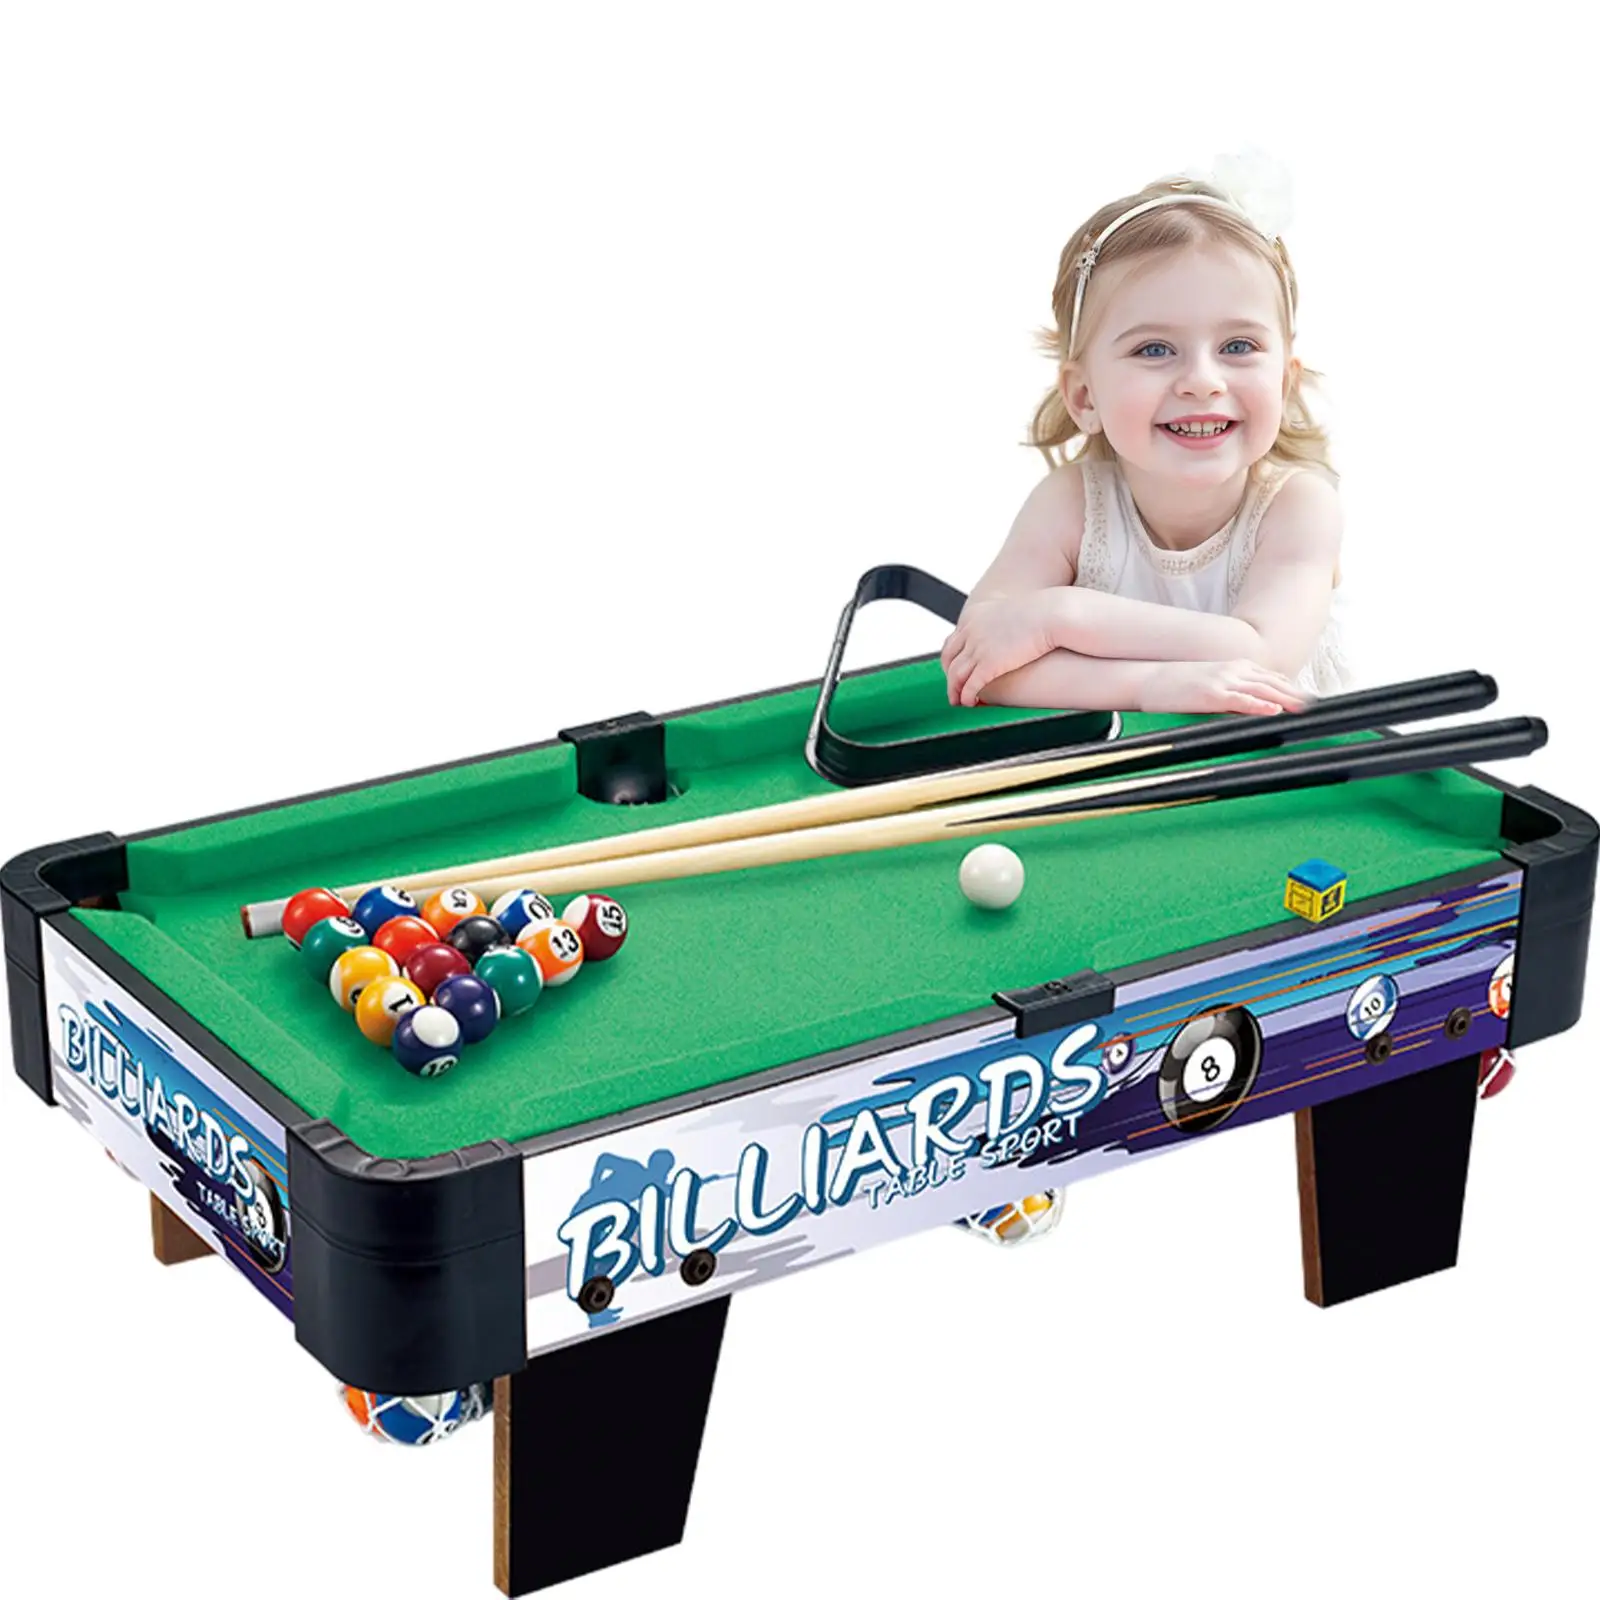 Pool Table Set Desktop Snooker Chalk, Triangle Rack Tabletop Billiards Game Indoor Game Toy for Boys Girls Office Use Family